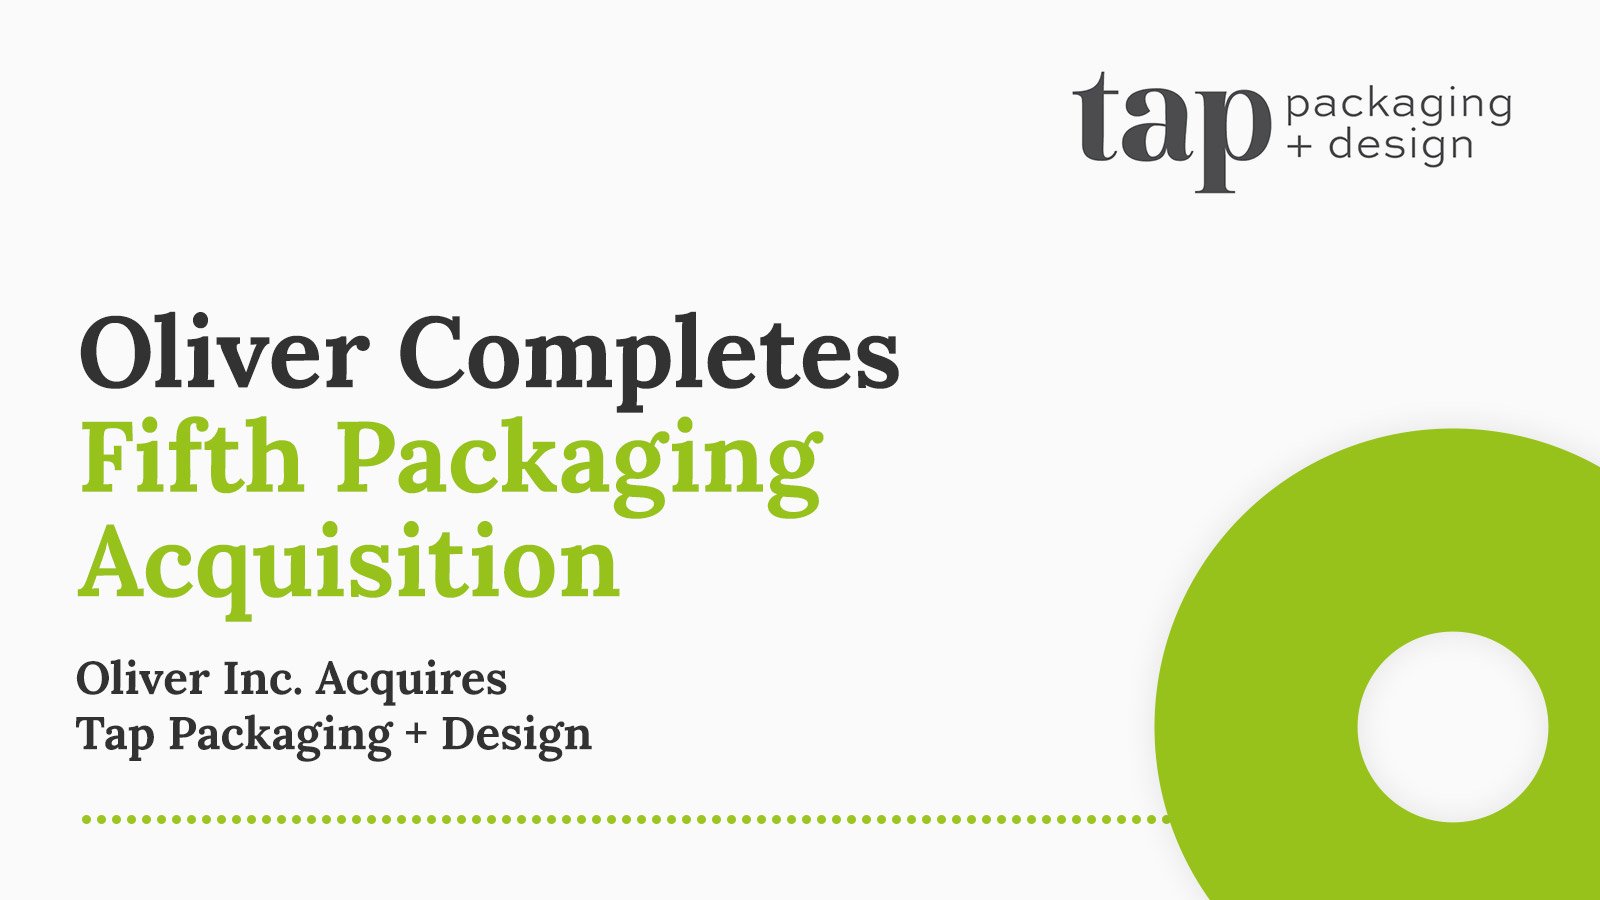 Oliver Completes Fifth Packaging Acquisition: Oliver Inc. Acquires Tap Packaging + Design